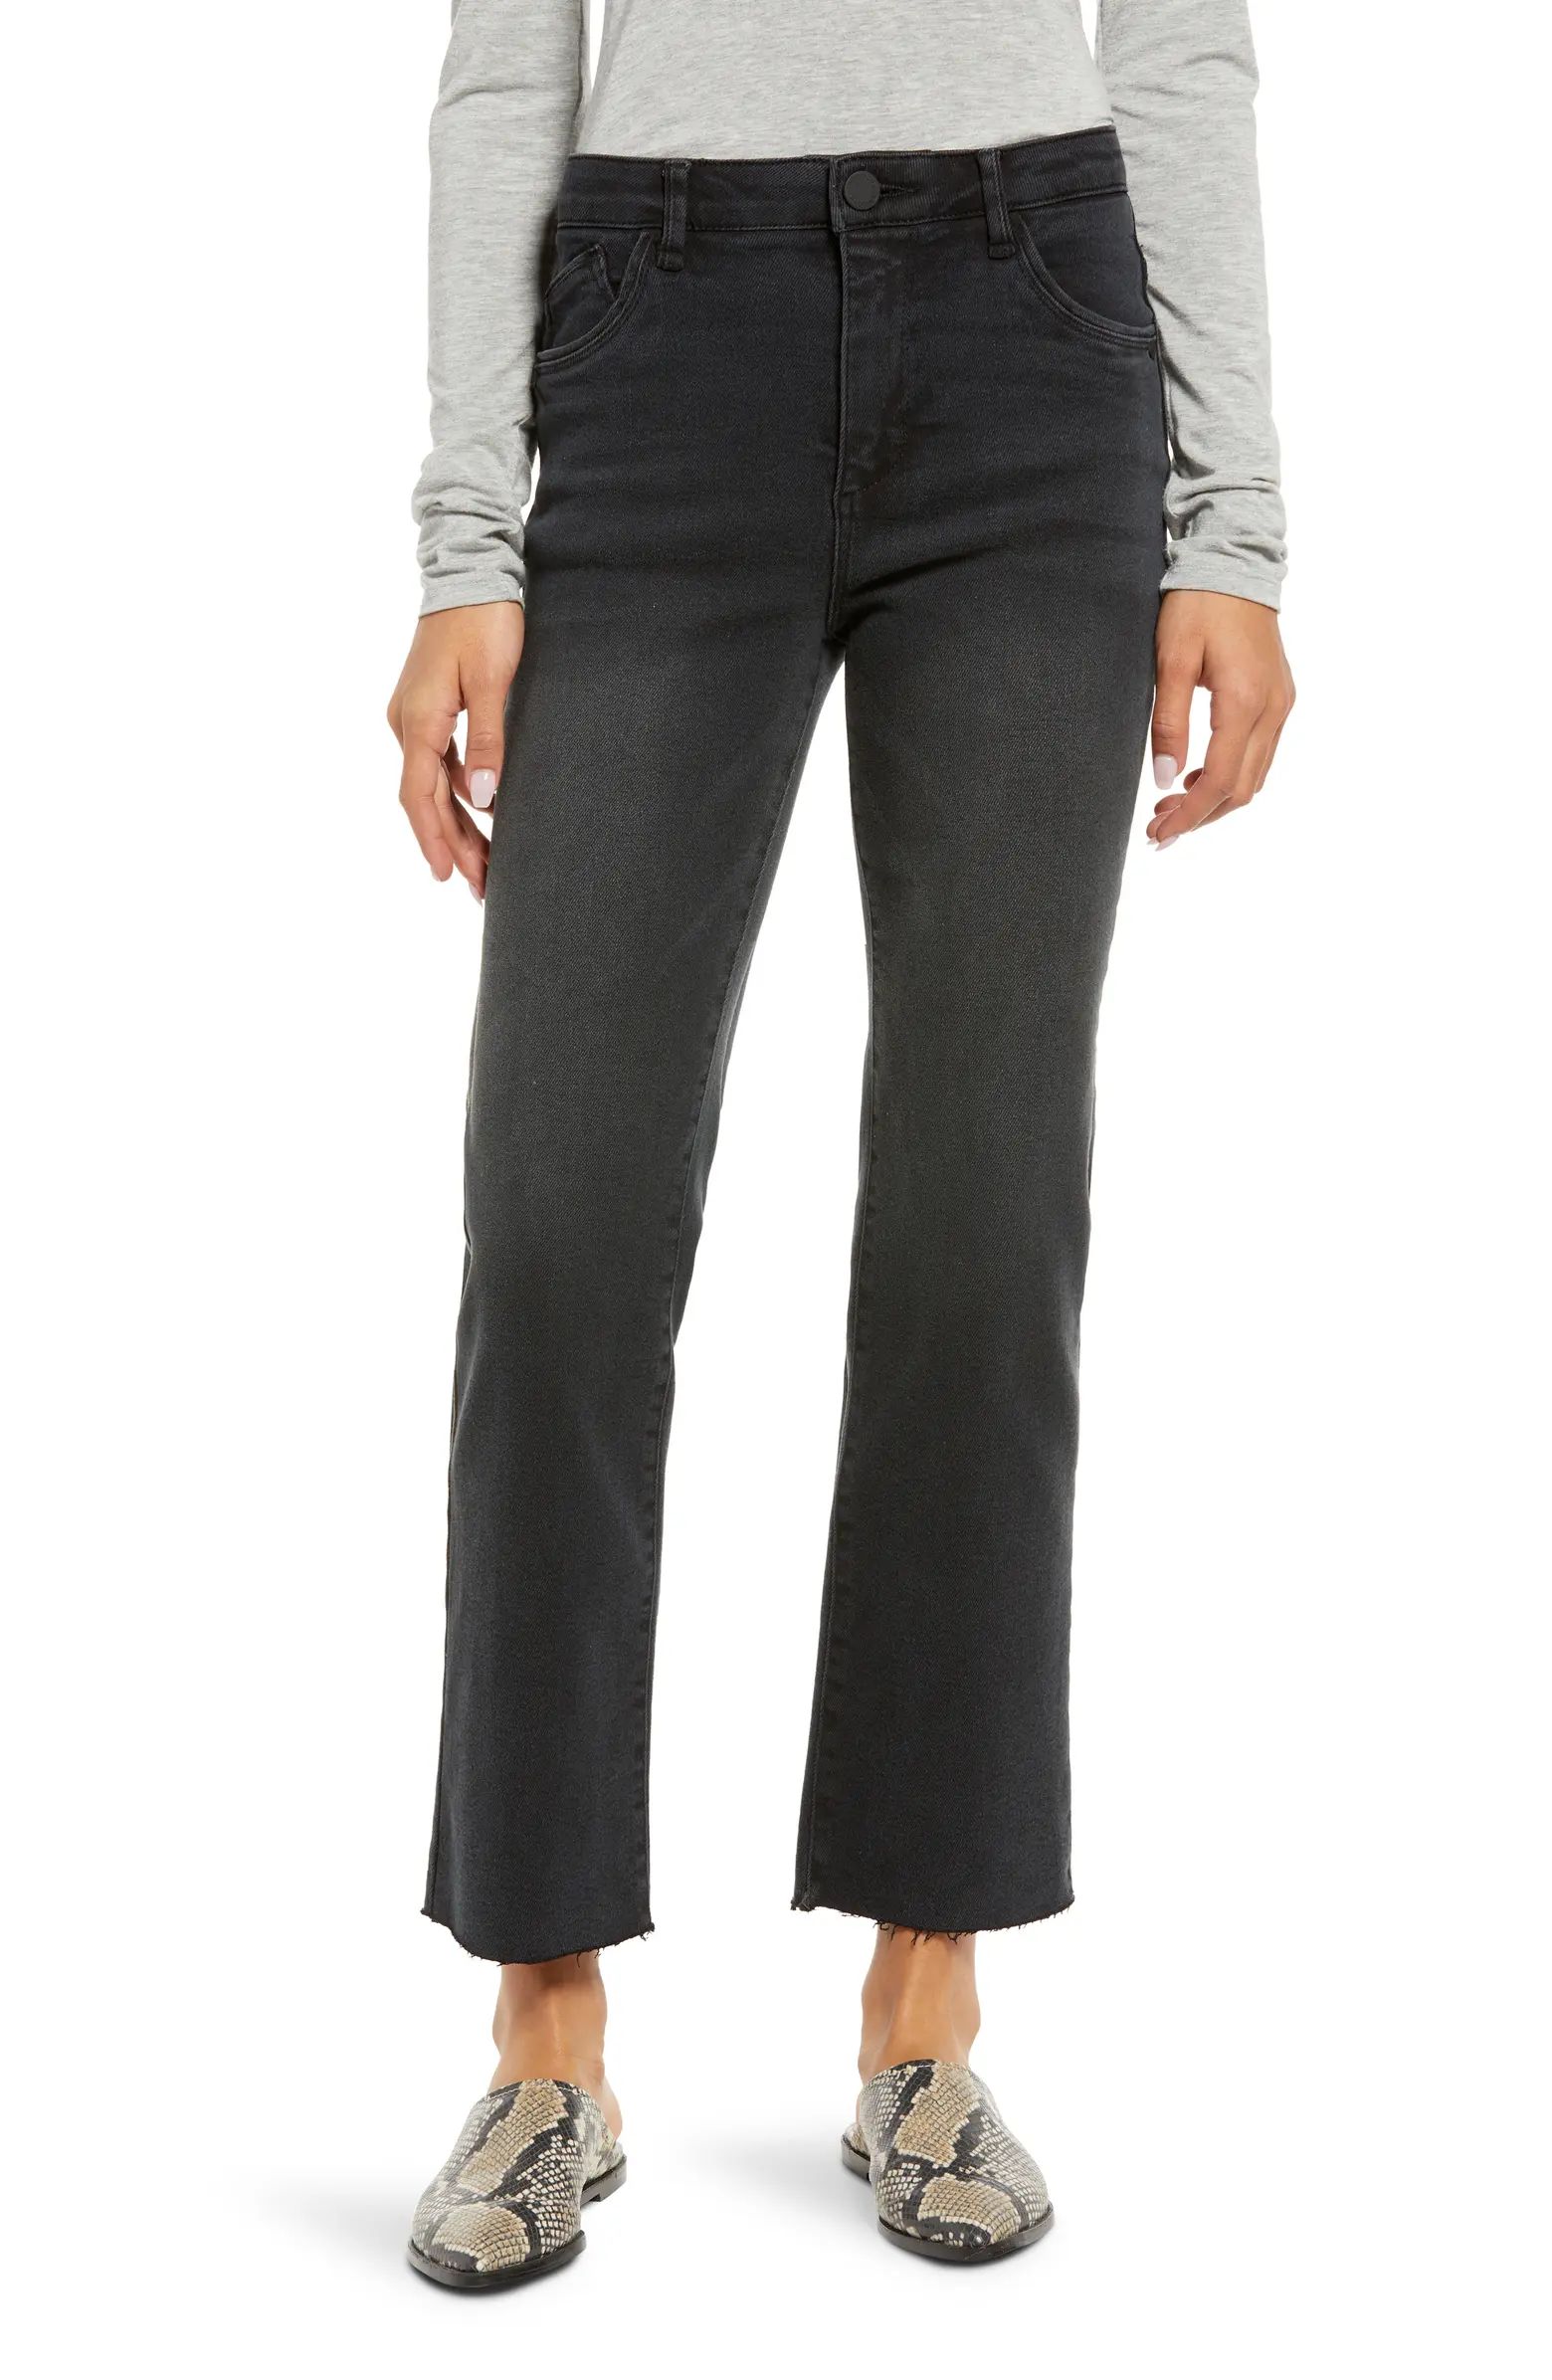 Rock laid-back vintage style in slim-fitting bootcut jeans featuring a super-high waist, raw hems... | Nordstrom